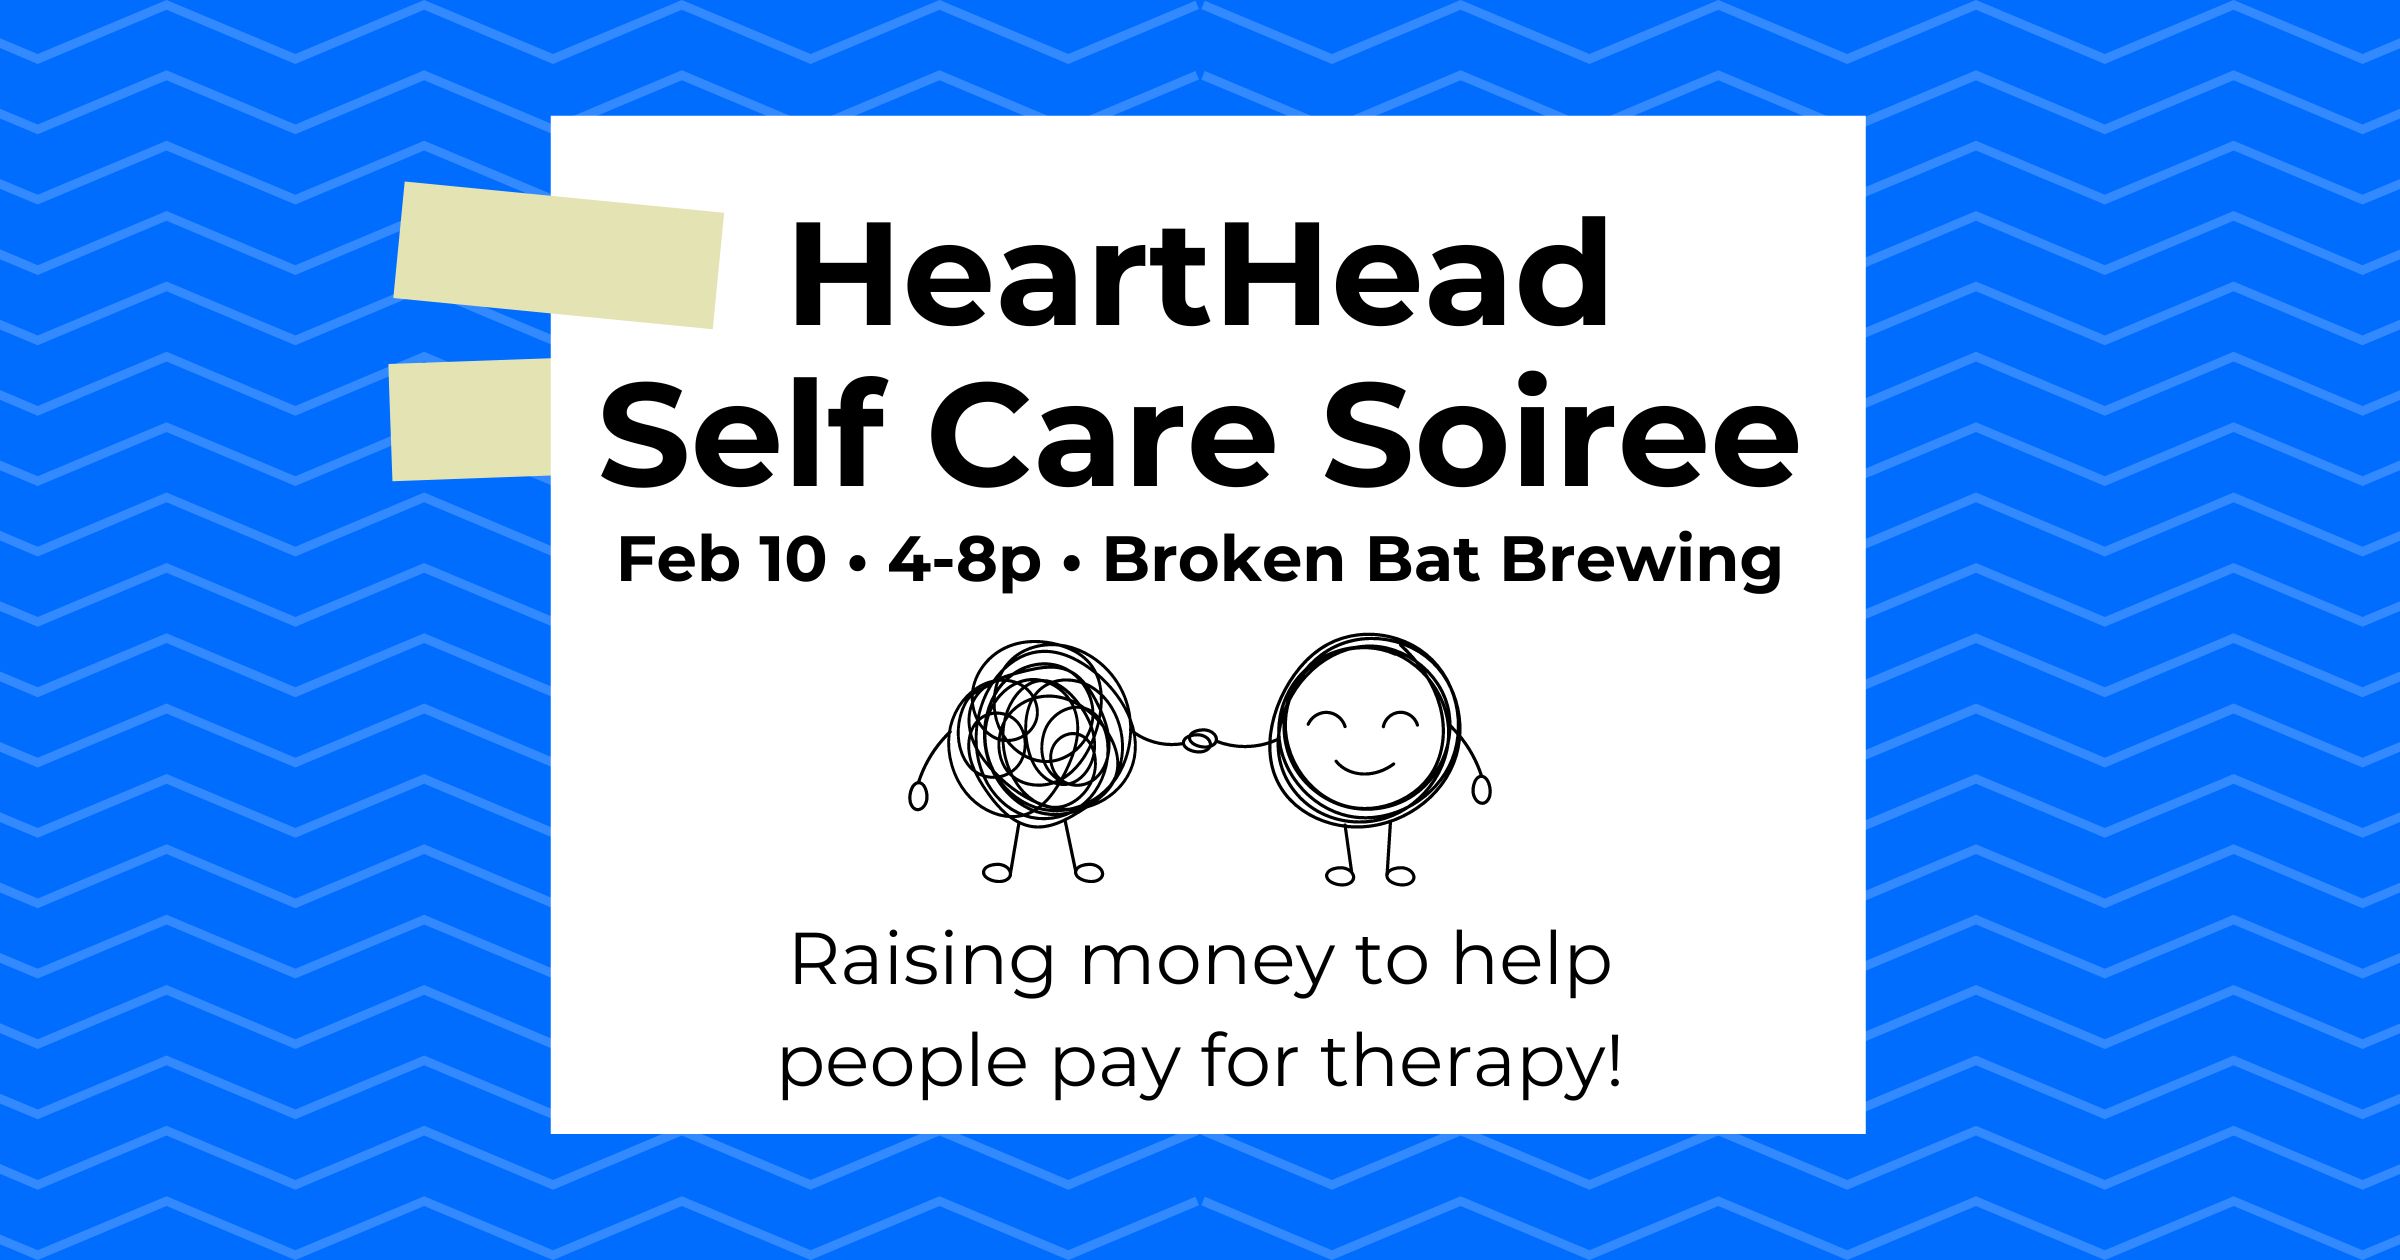 "HeartHead Self Care Soiree on February 10 from 4 to 8 p.m. at Broken Bat Brewing. Raising money to help people pay for therapy."